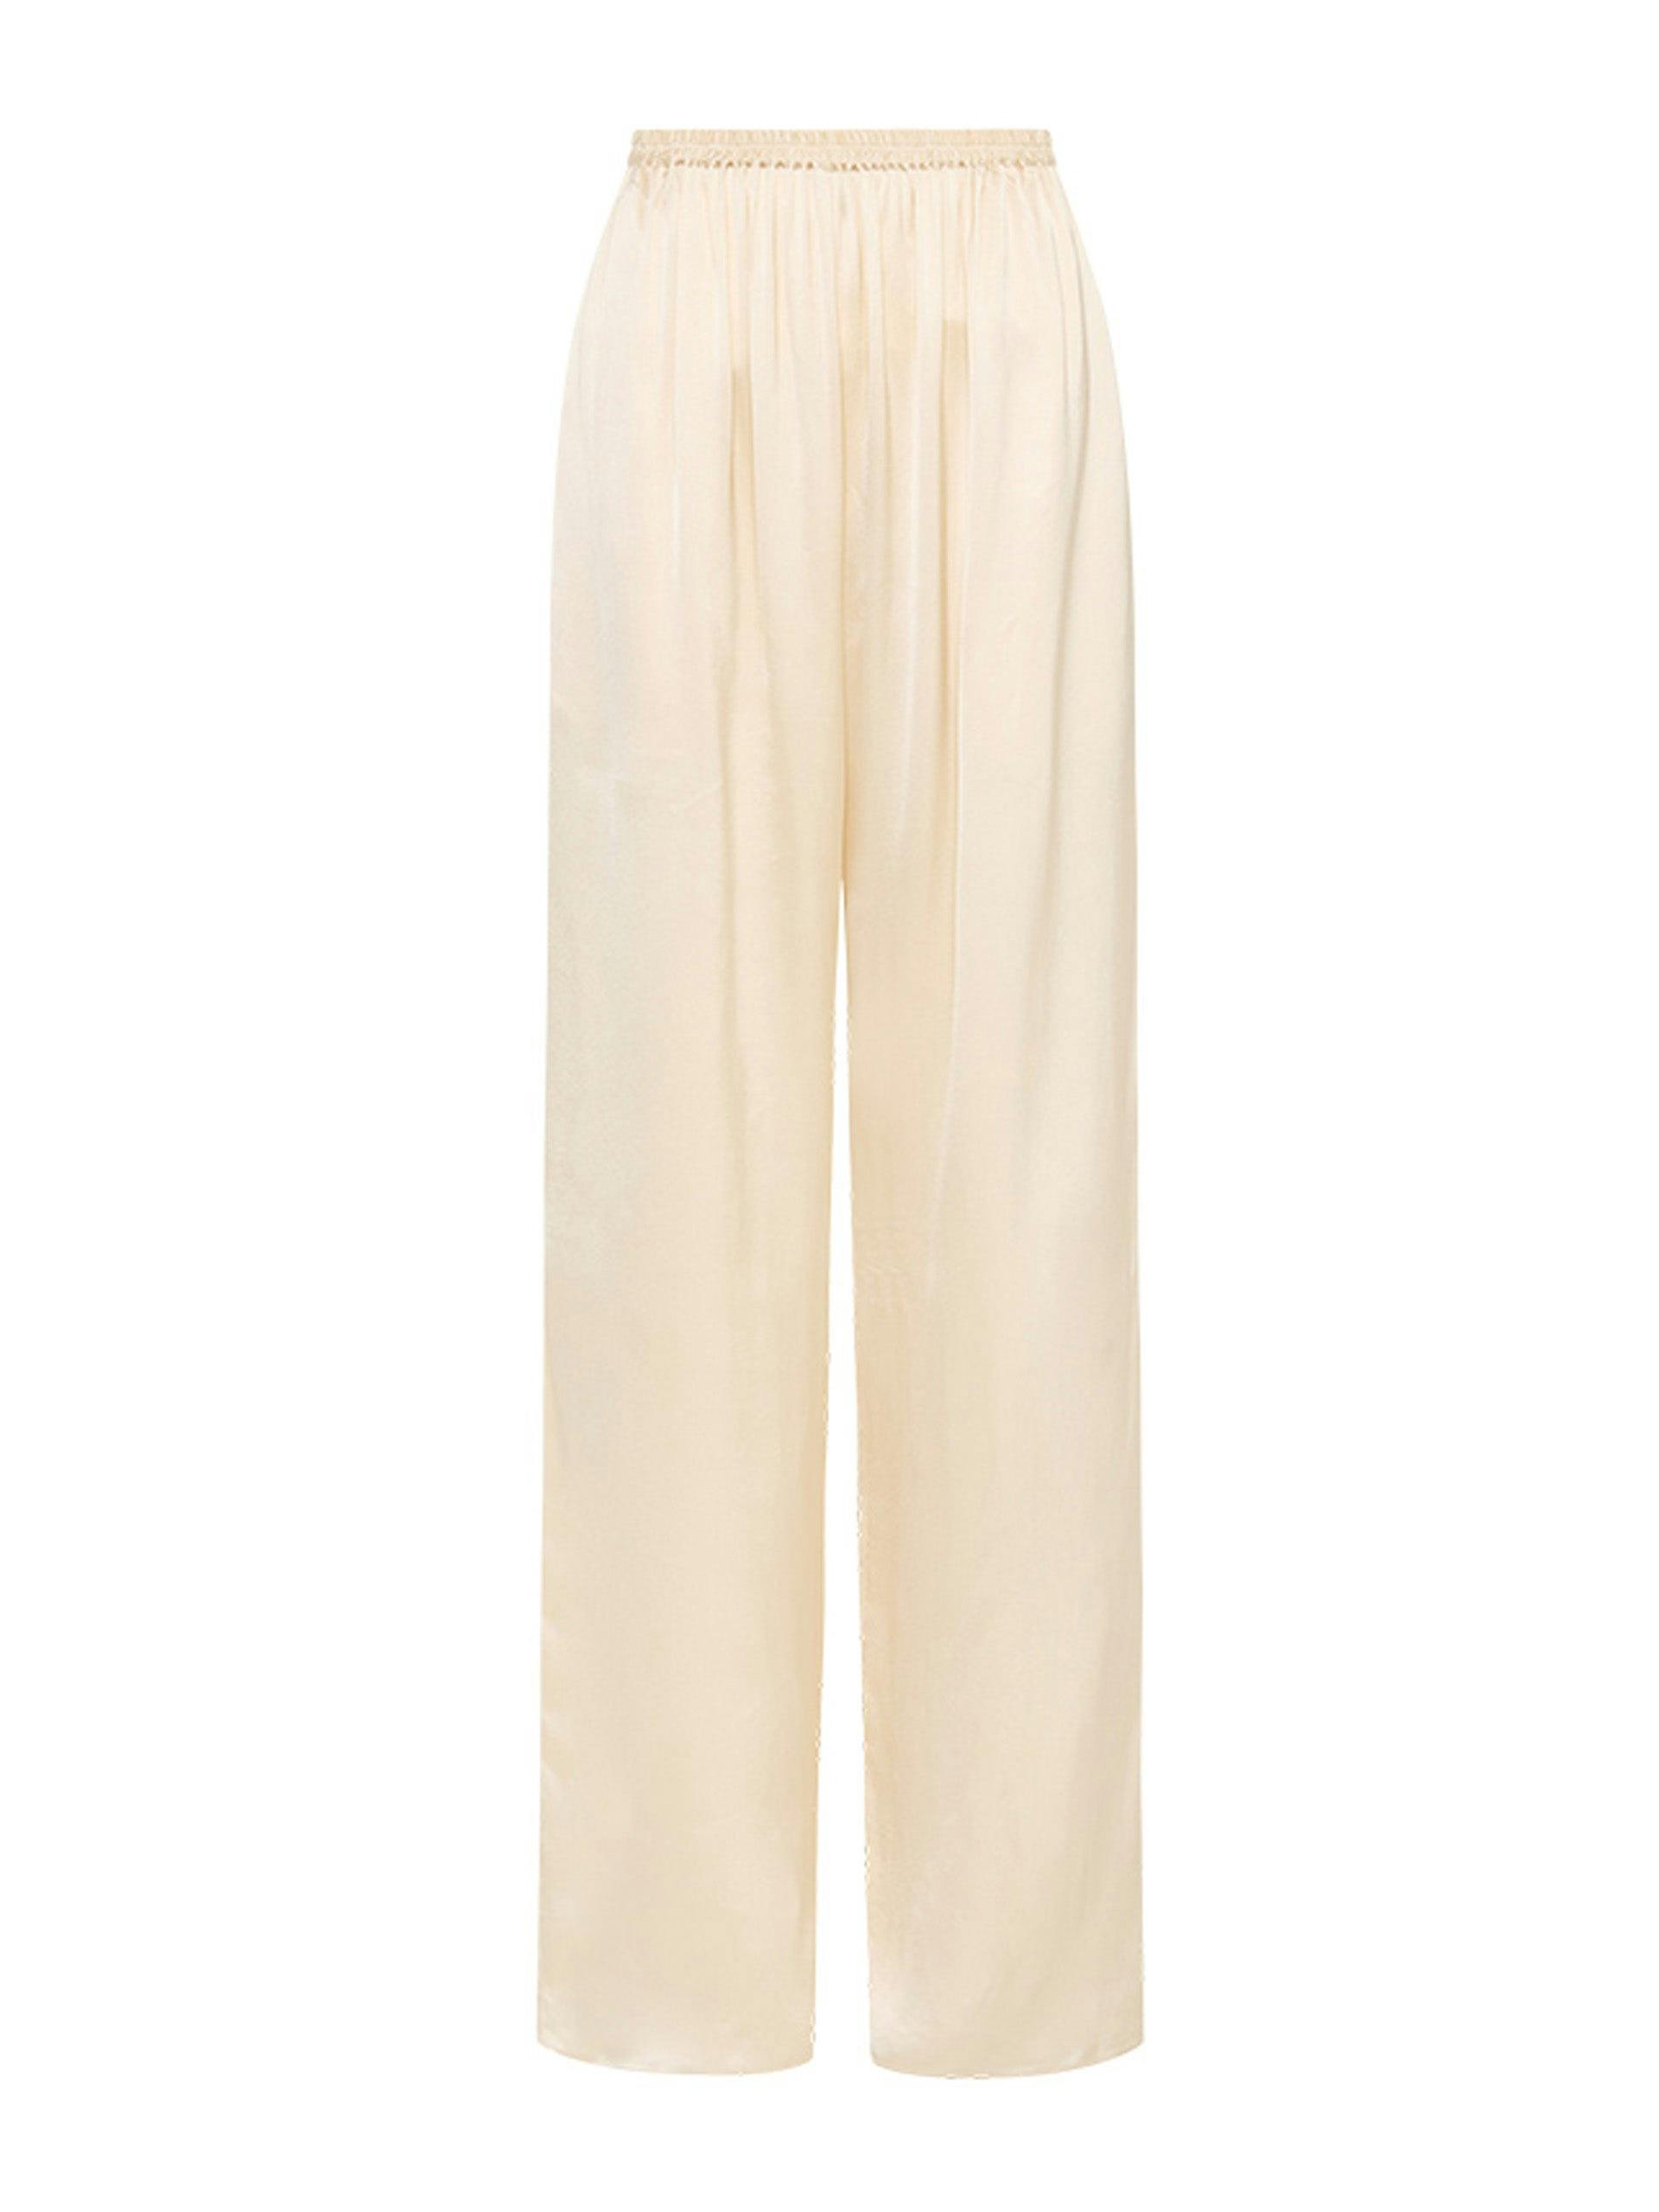 Ivory relaxed satin pants